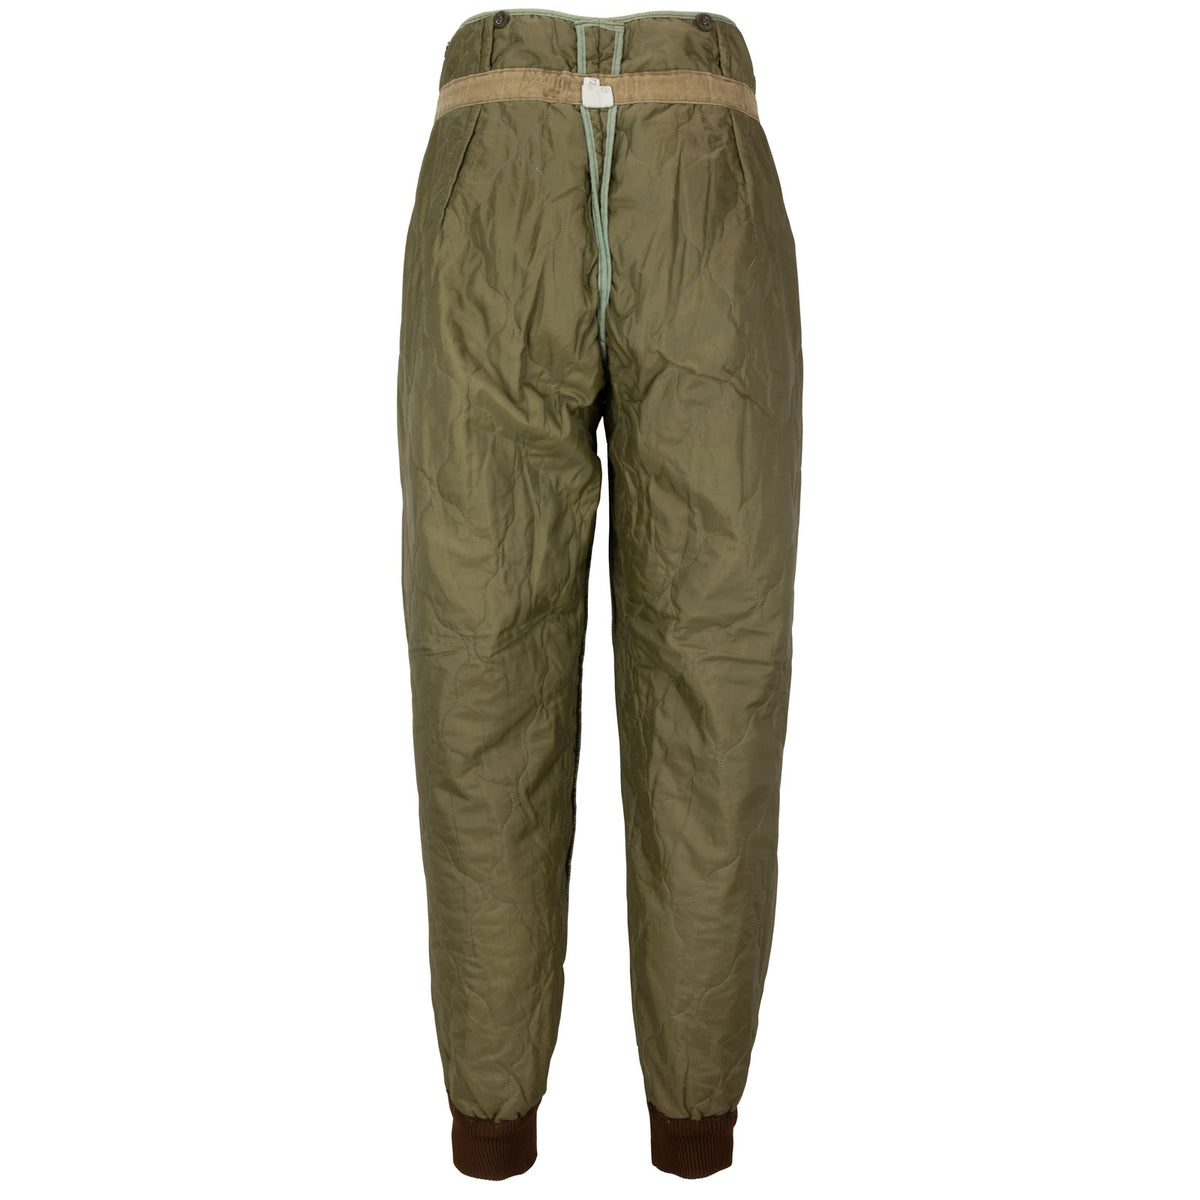 New Czech Quilted Pant Liner